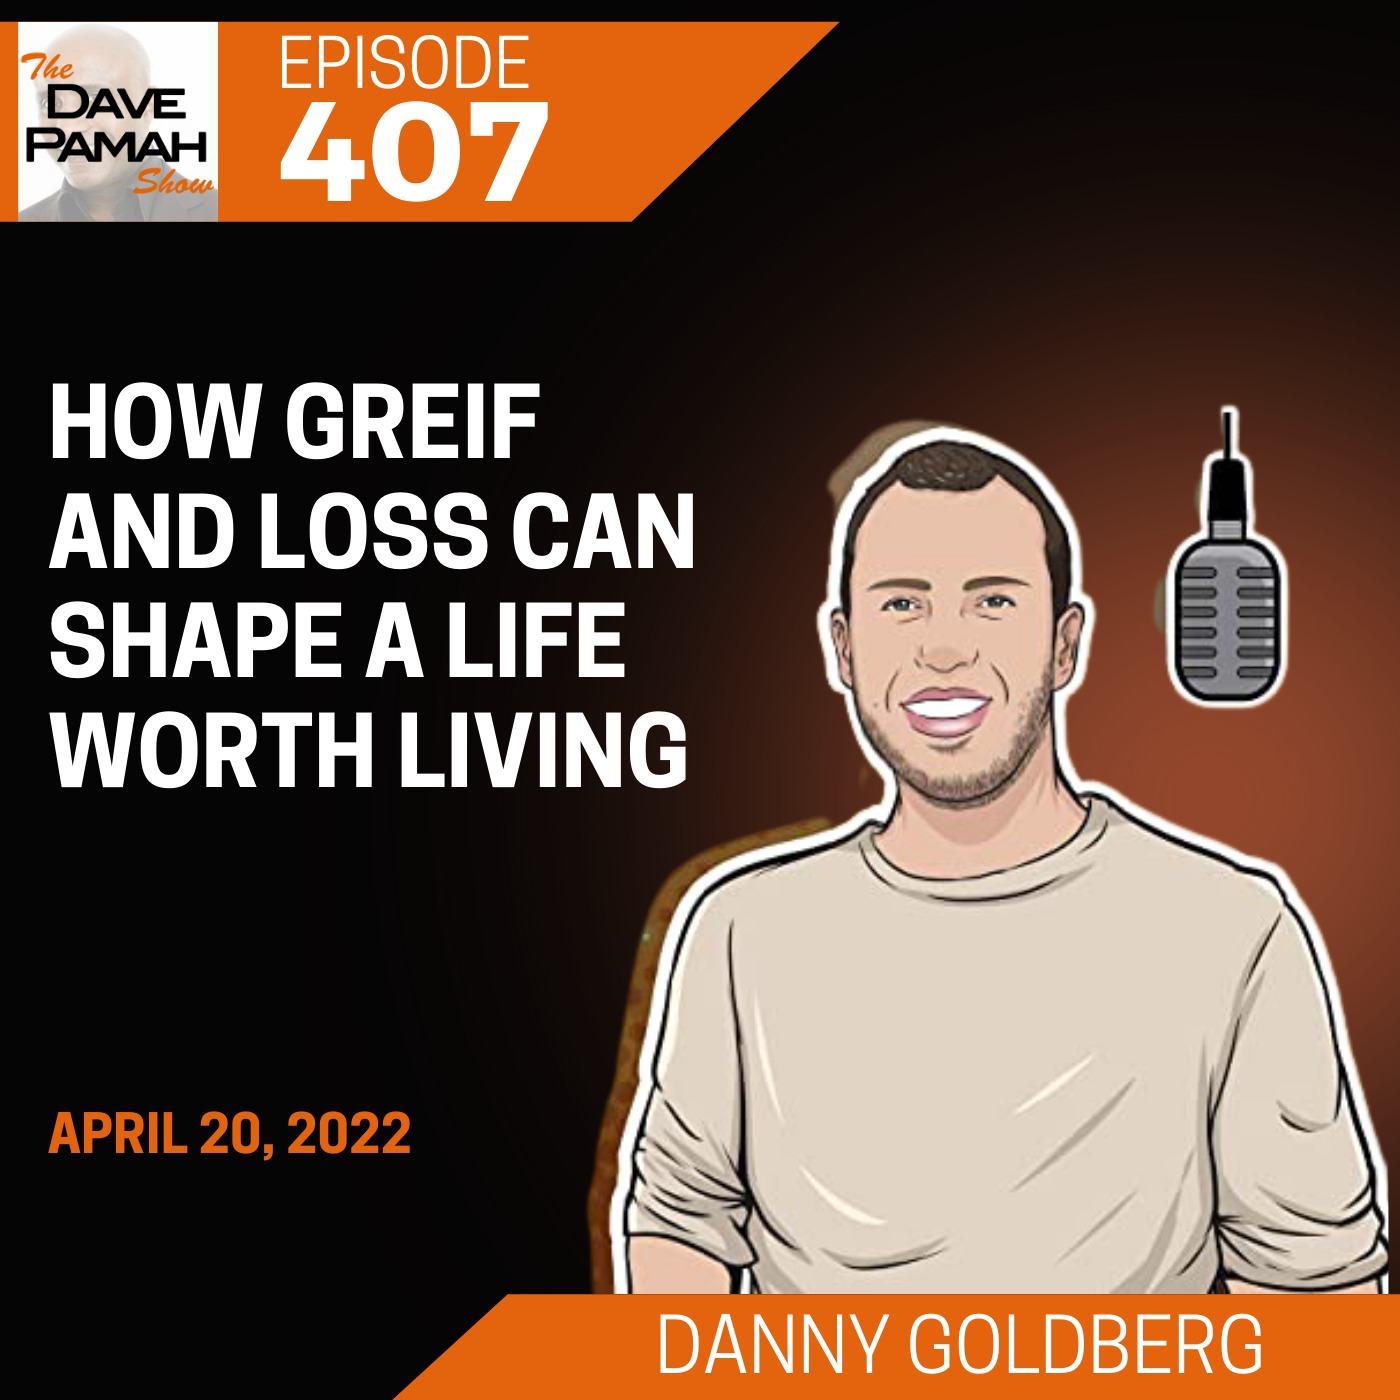 How grief and loss can shape a life worth living with Danny Goldberg